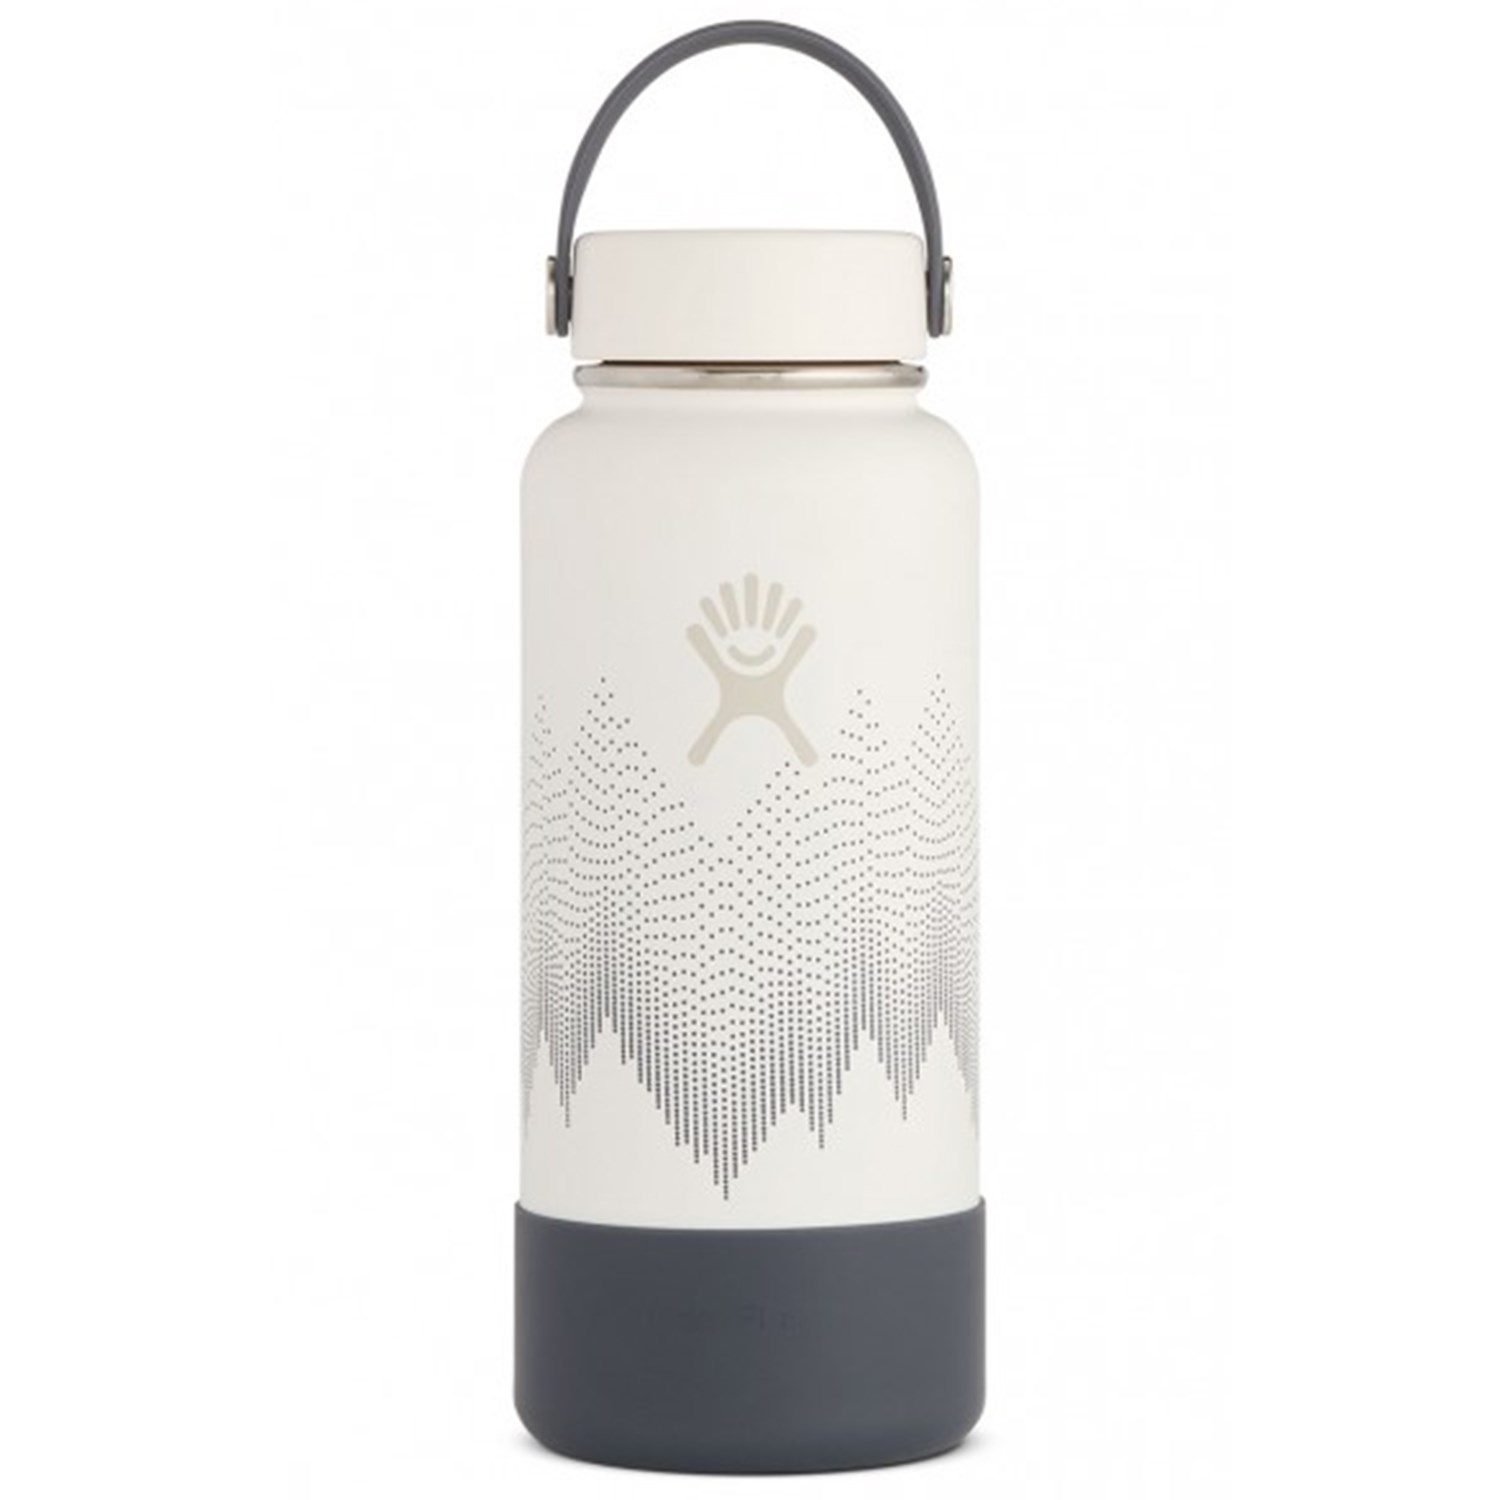 hydro flask limited edition sale